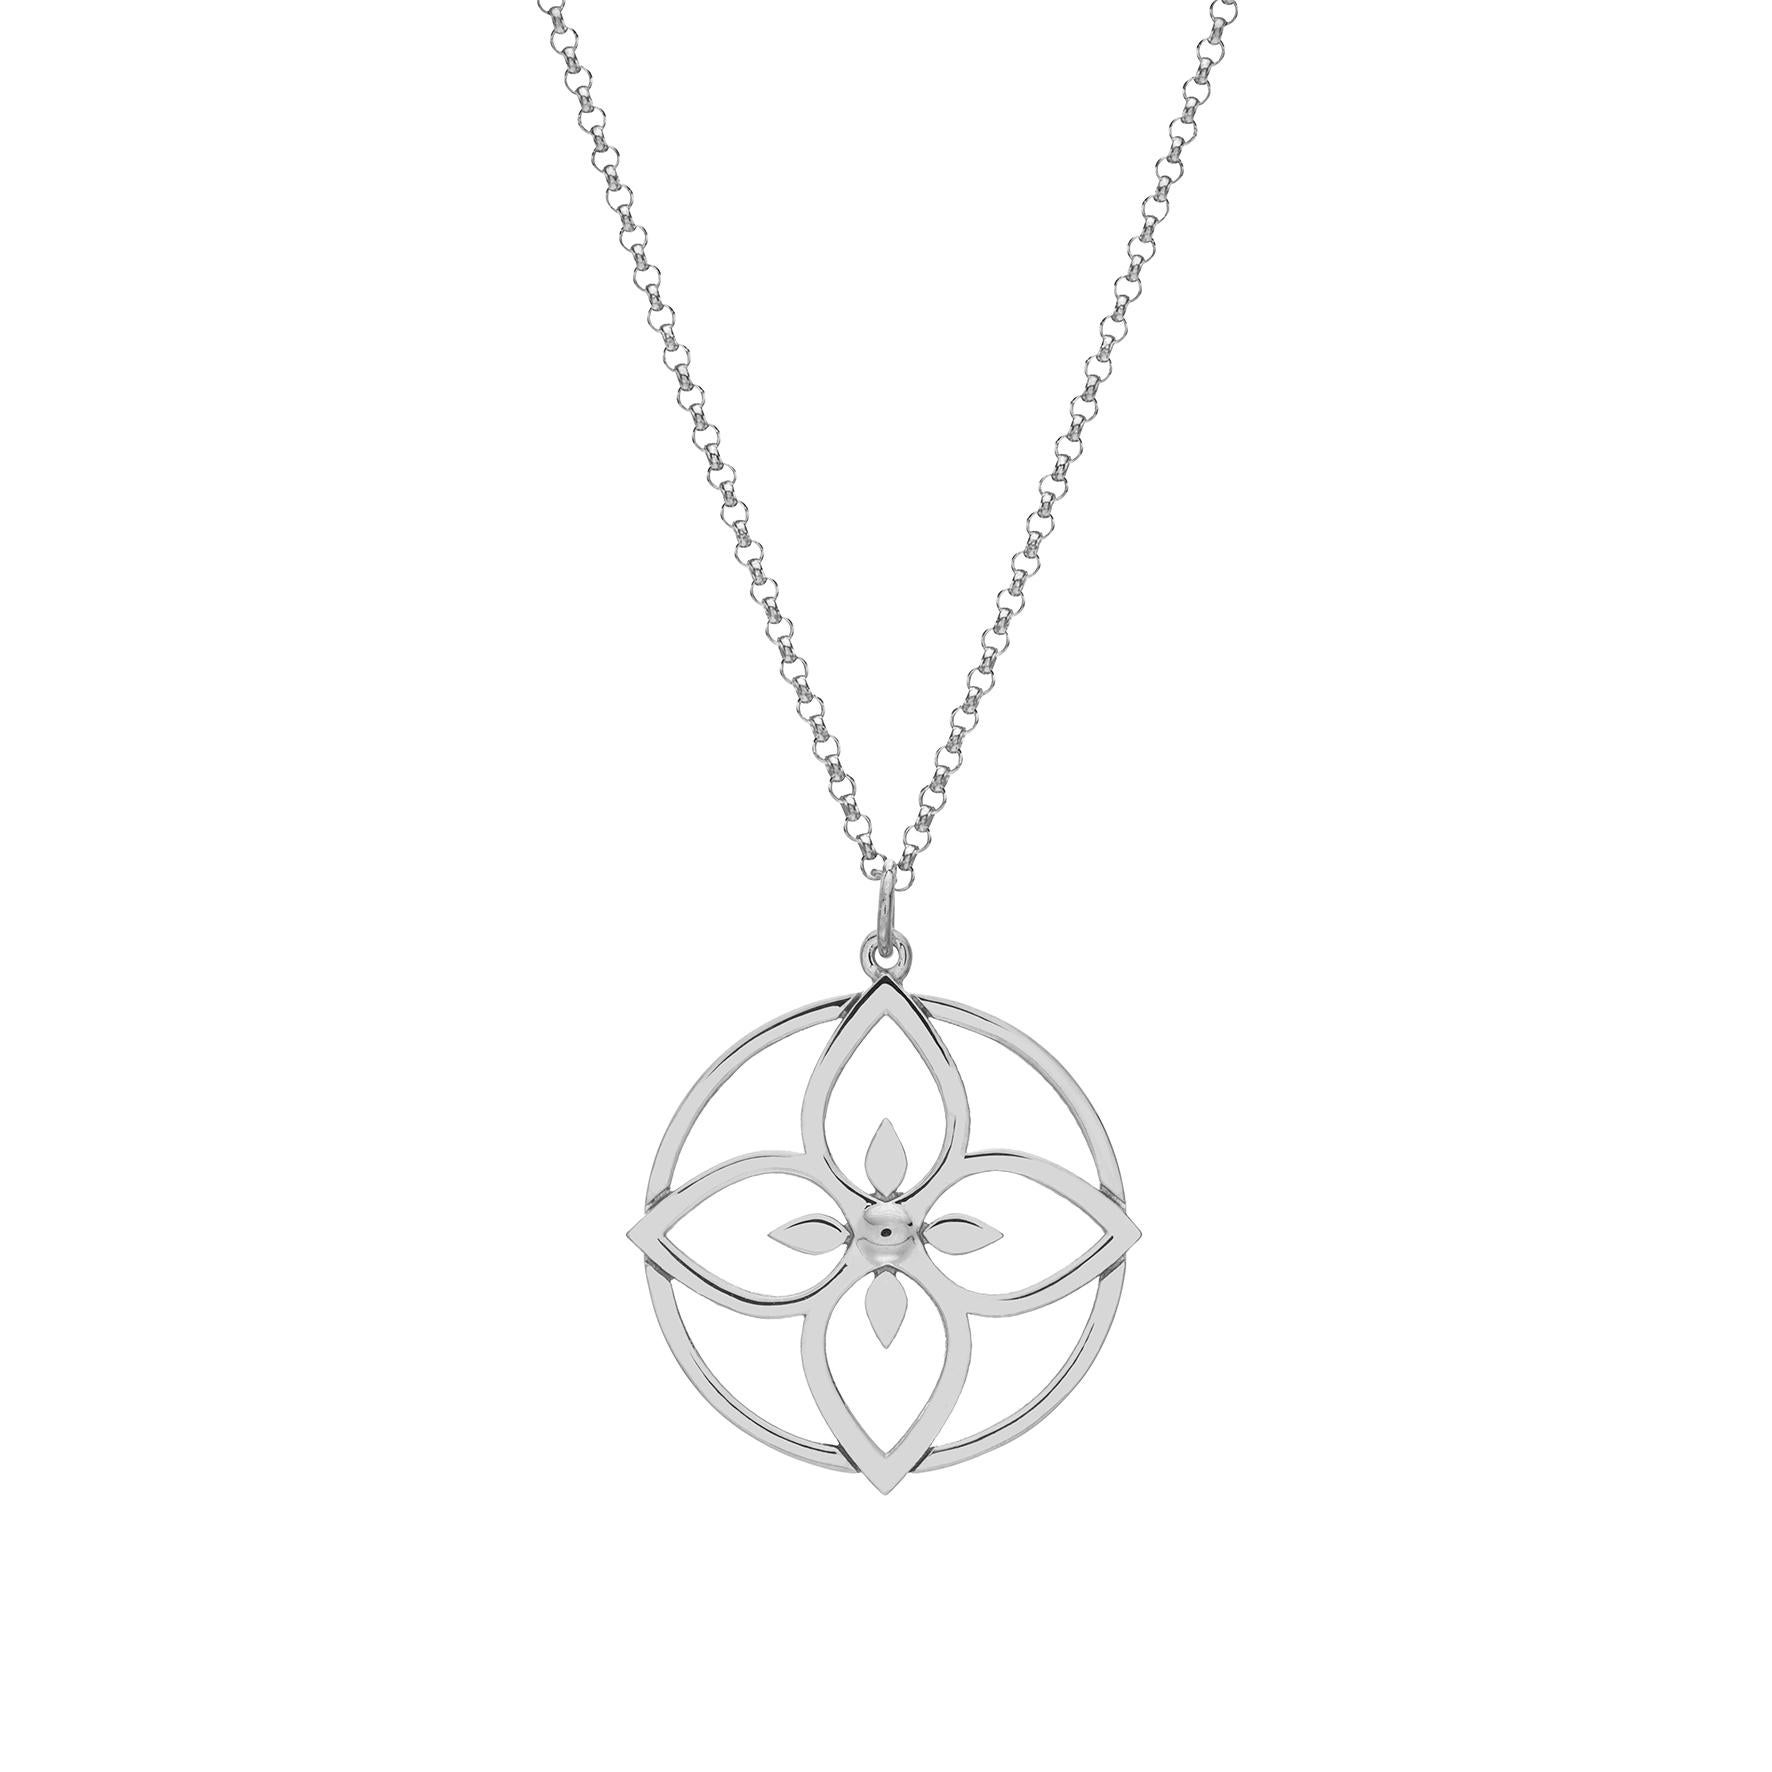 Round Lotus Flouer Love Pendant, with the eight leaves of lotus flower, handmade 
Original, Elegant, designed to be comfortable and easy to wear everyday!
The idea of this necklace, comes from the the most beautiful flowers with the particular